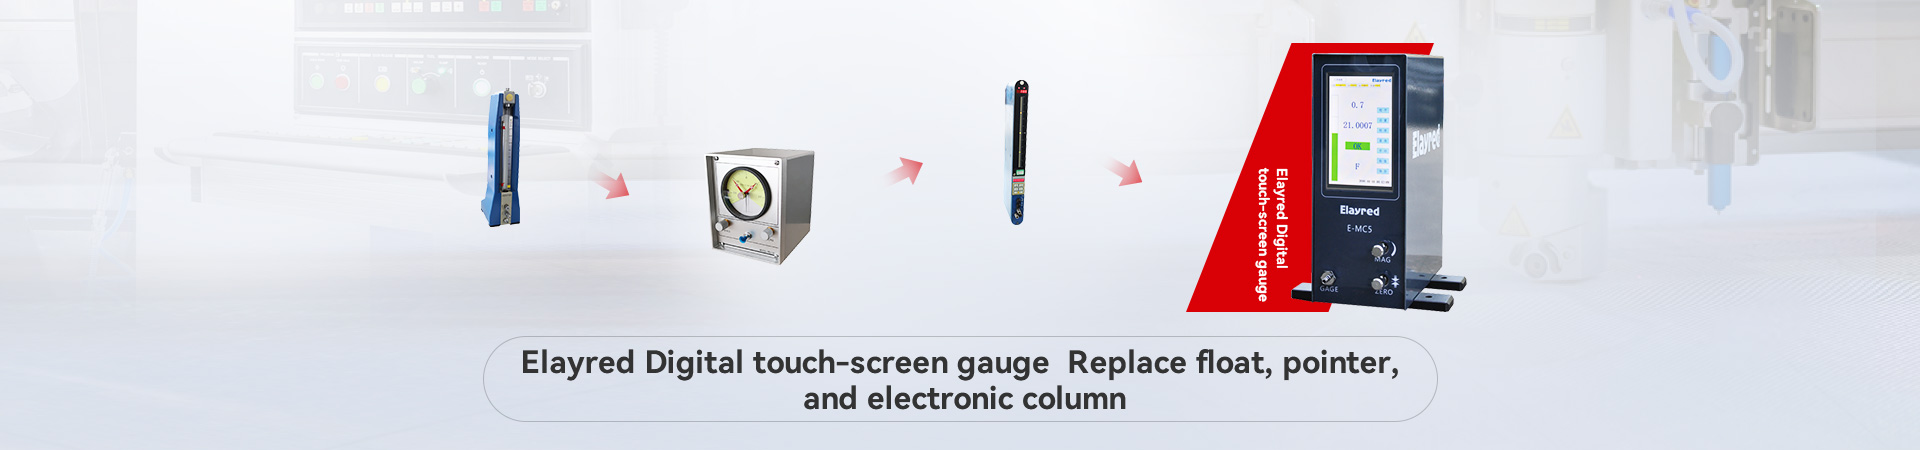 Elayred Digital touch-screen gauge  Replace float, pointer, and electronic column